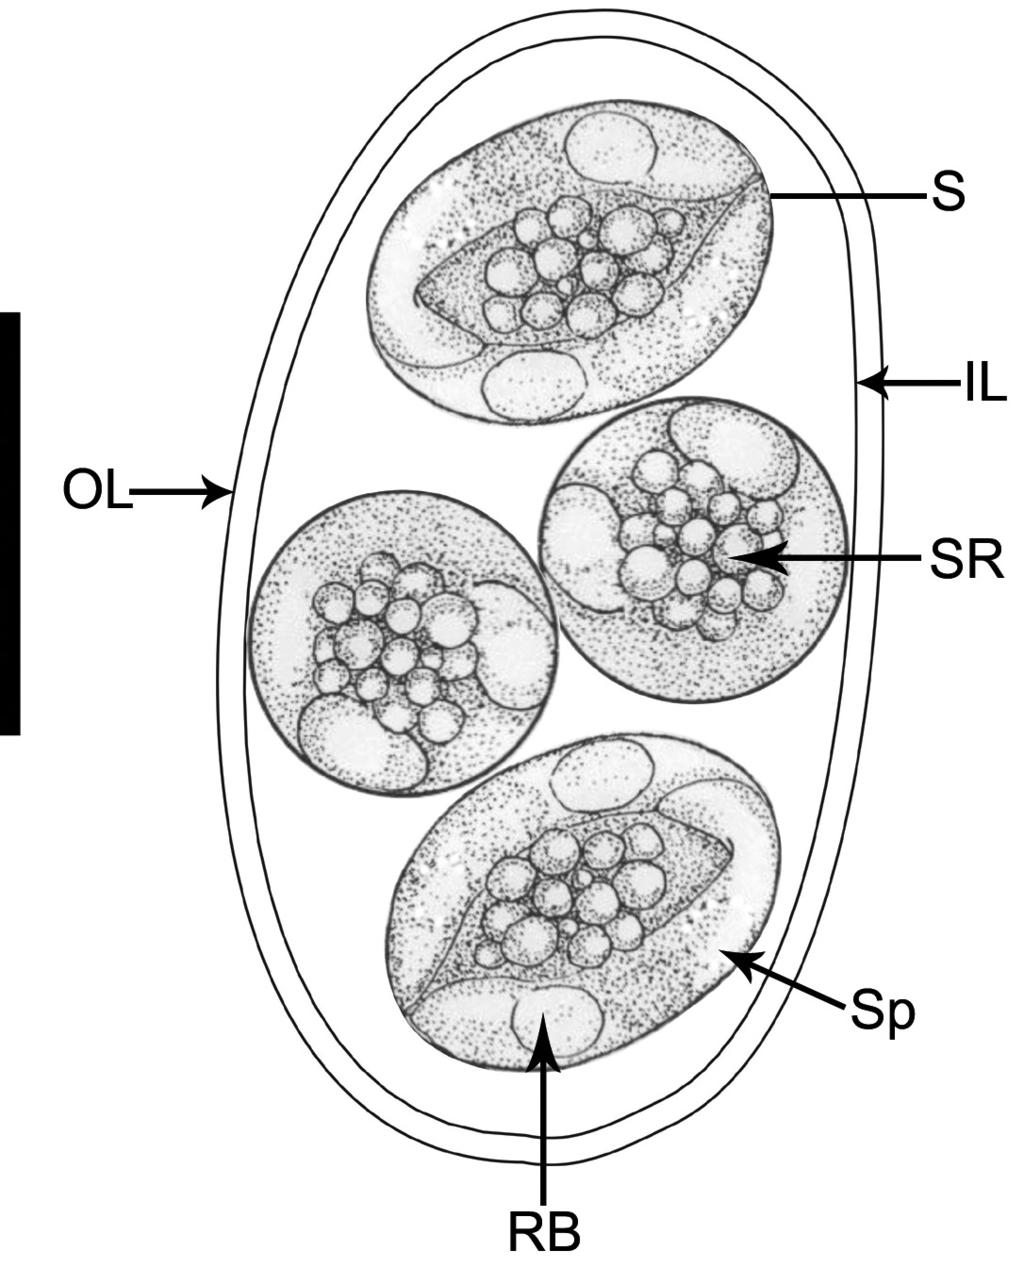 sporocyst wall (Fig. 1). Stieda body or other localized thickening of wall absent. Sporozoites banana-shaped (Fig.